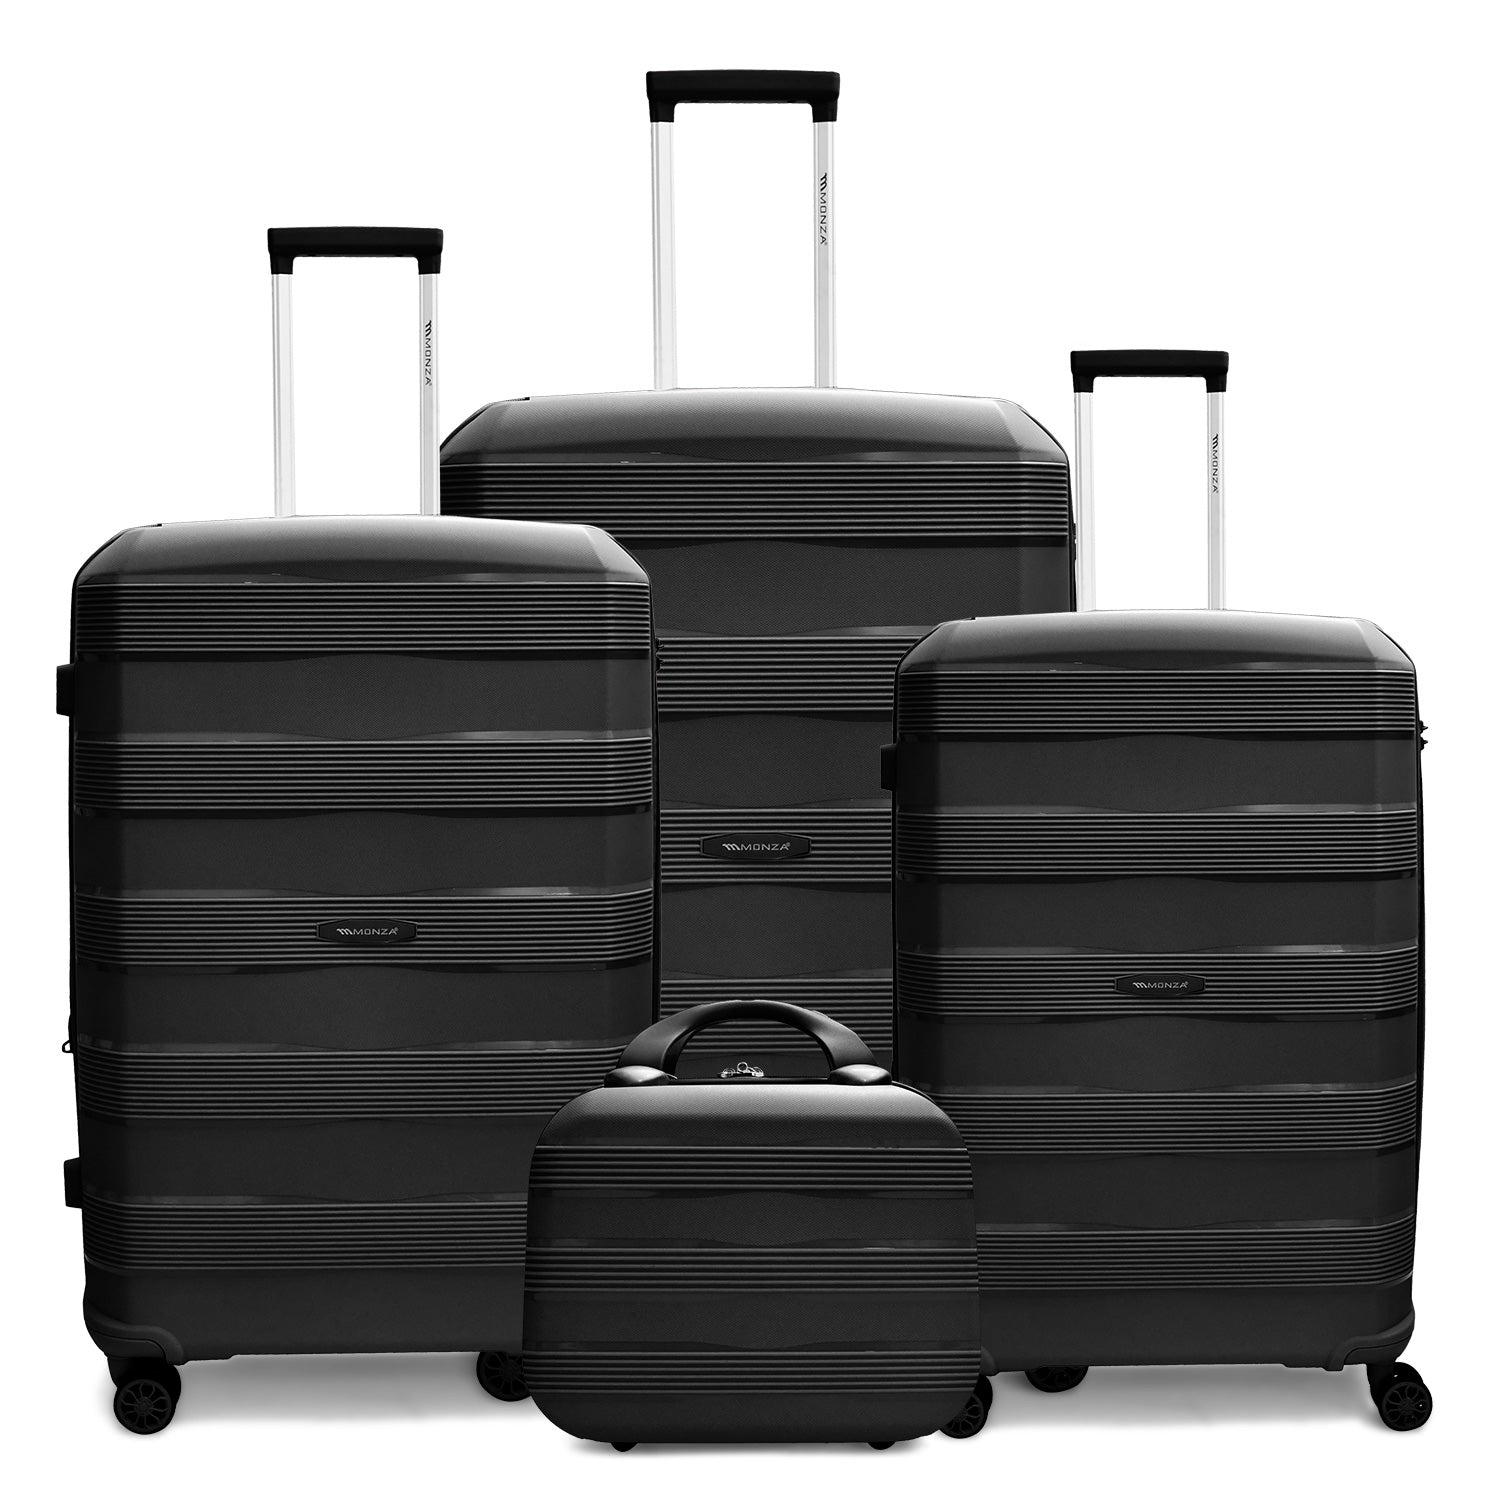 MONZA LINEX 360° PP LUGGAGE 3PC (20/24/28")+1 FREE BEAUTY CASE